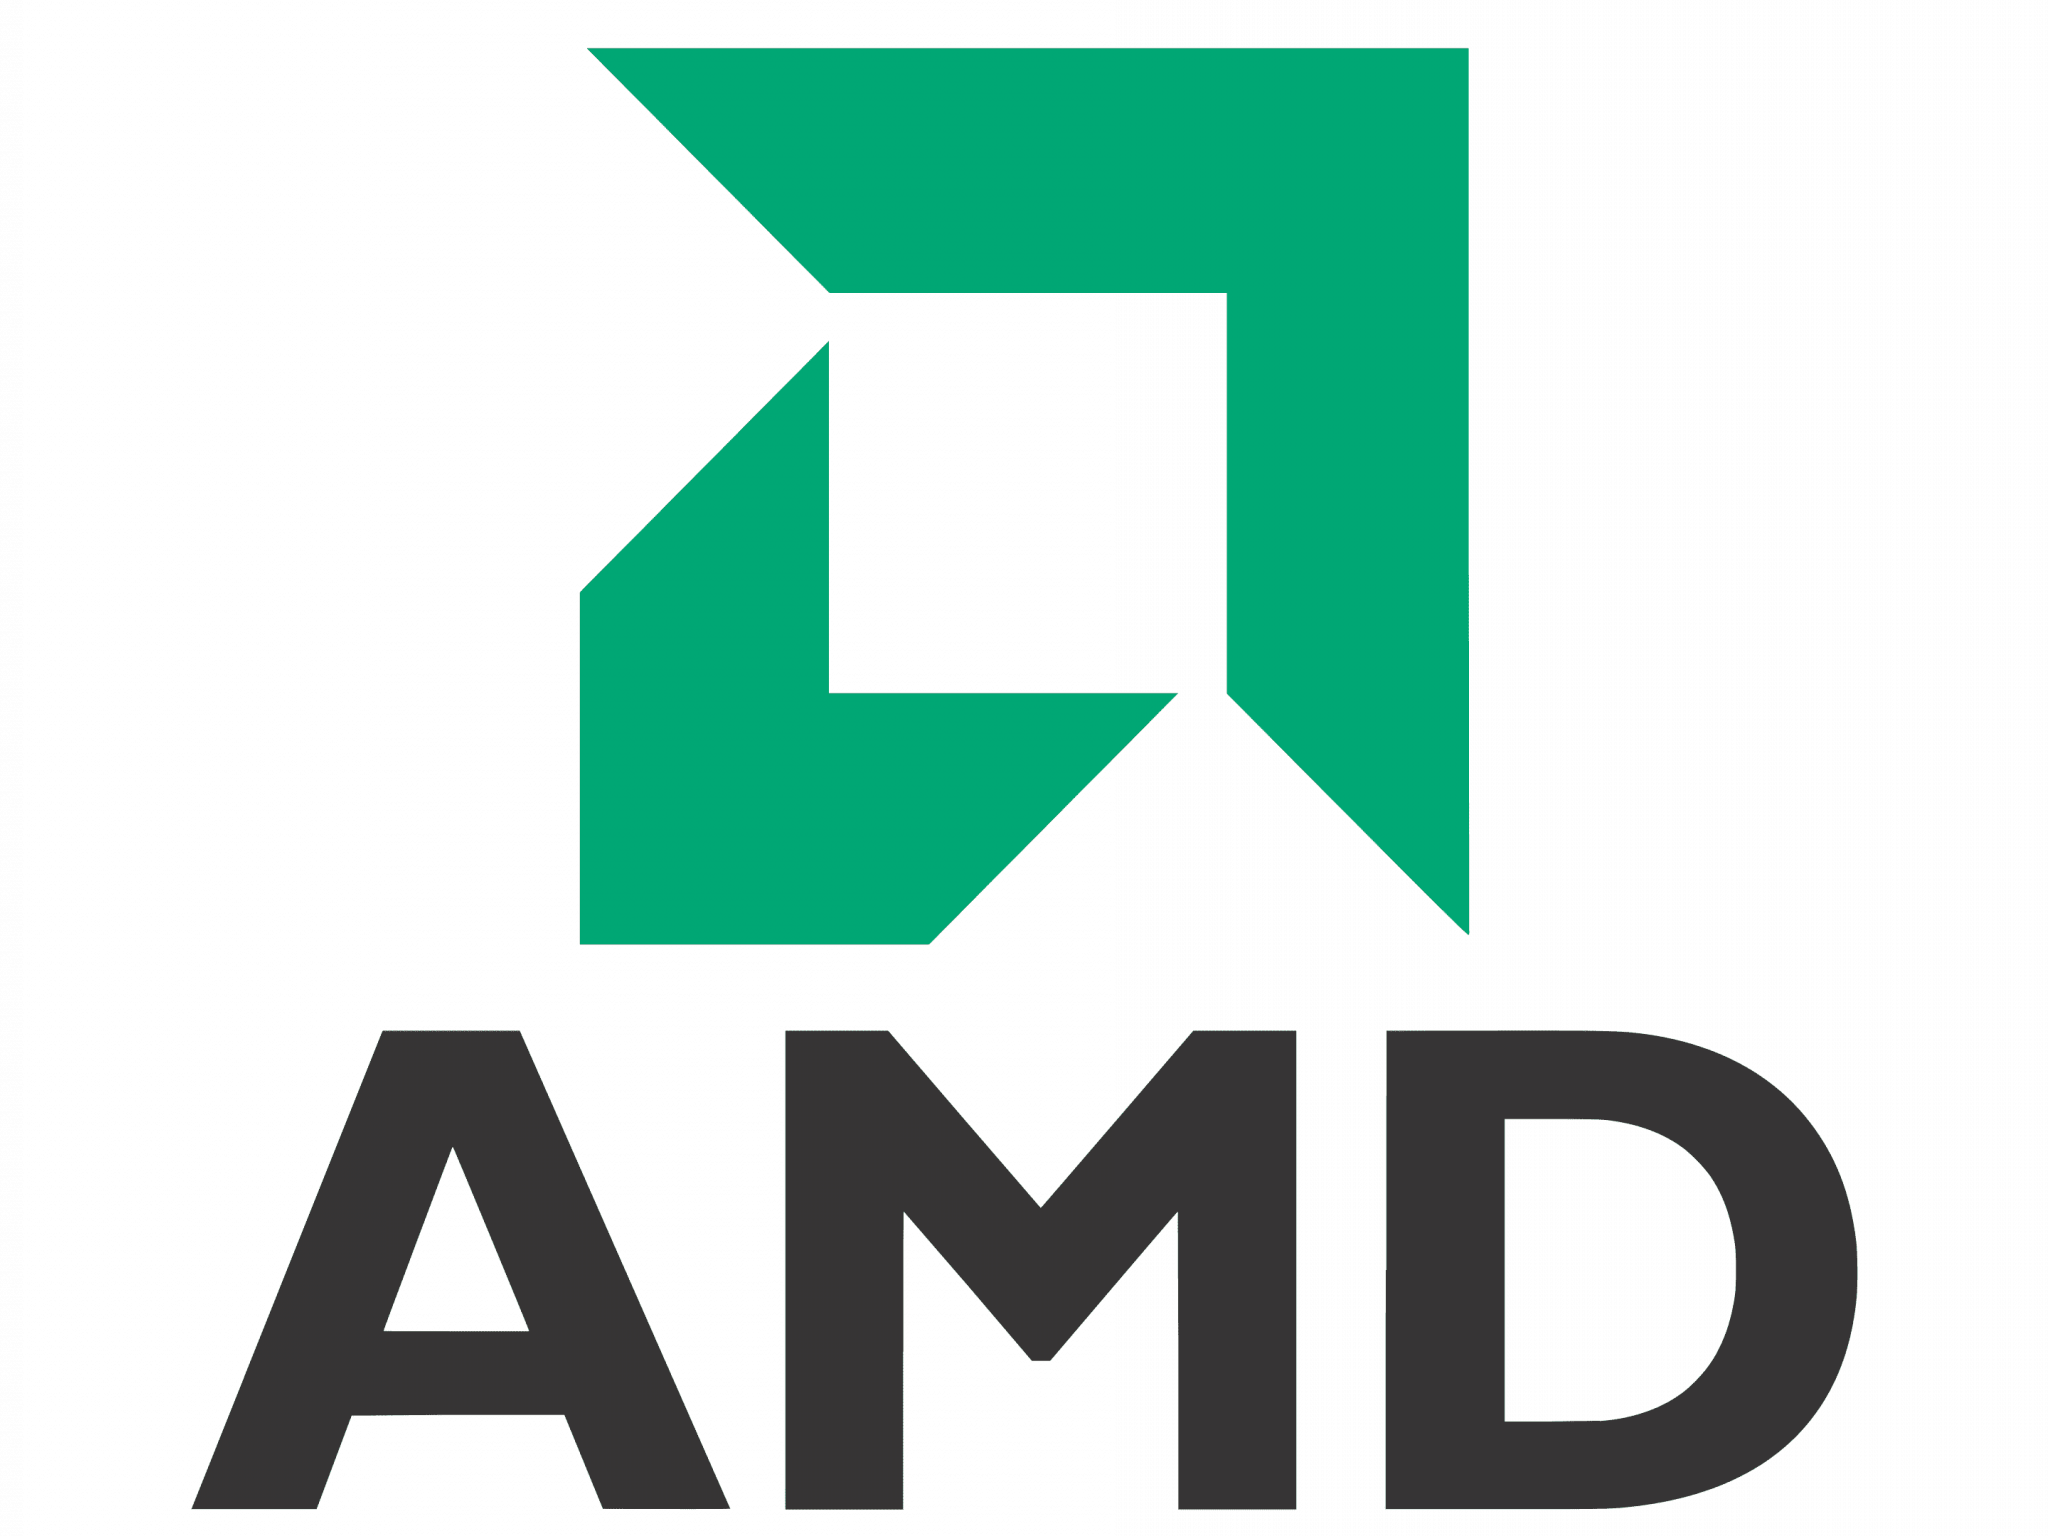  amd-to-rally-around-39-here-are-5-other-price-target-changes-for-monday 